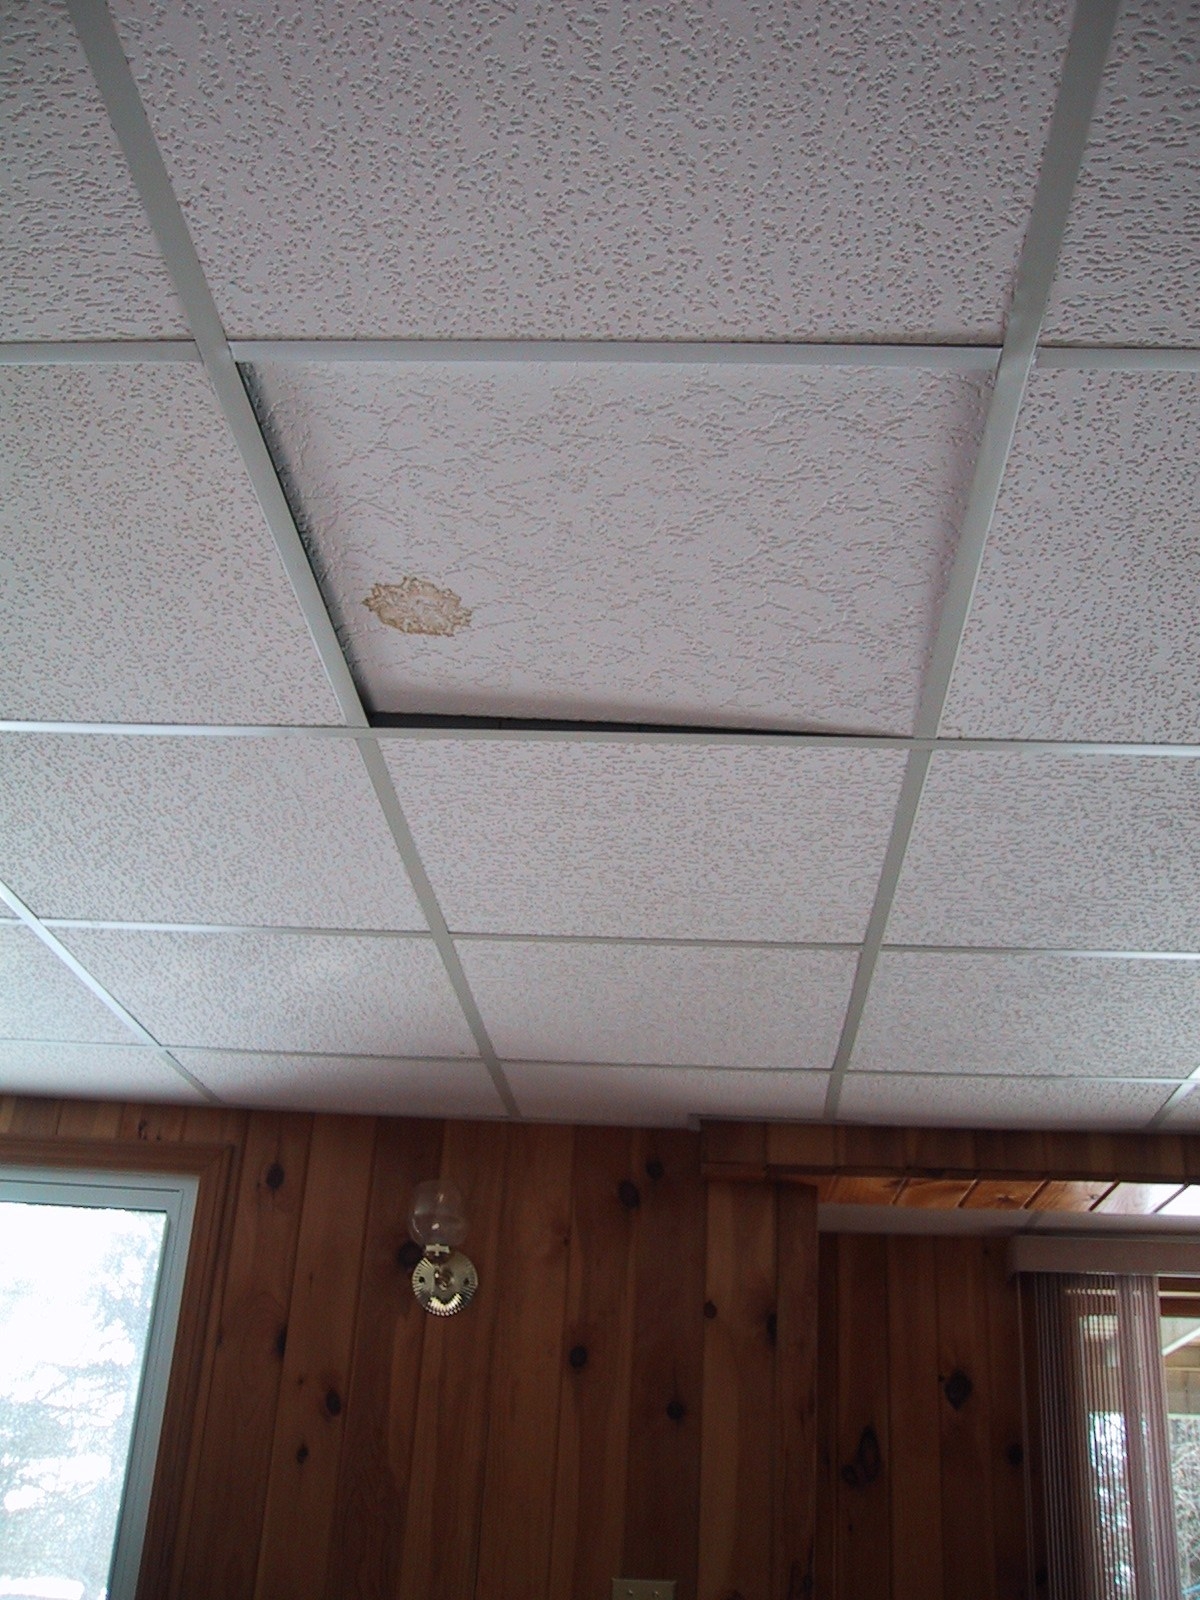 Permalink to Asbestos Ceiling Tile Size